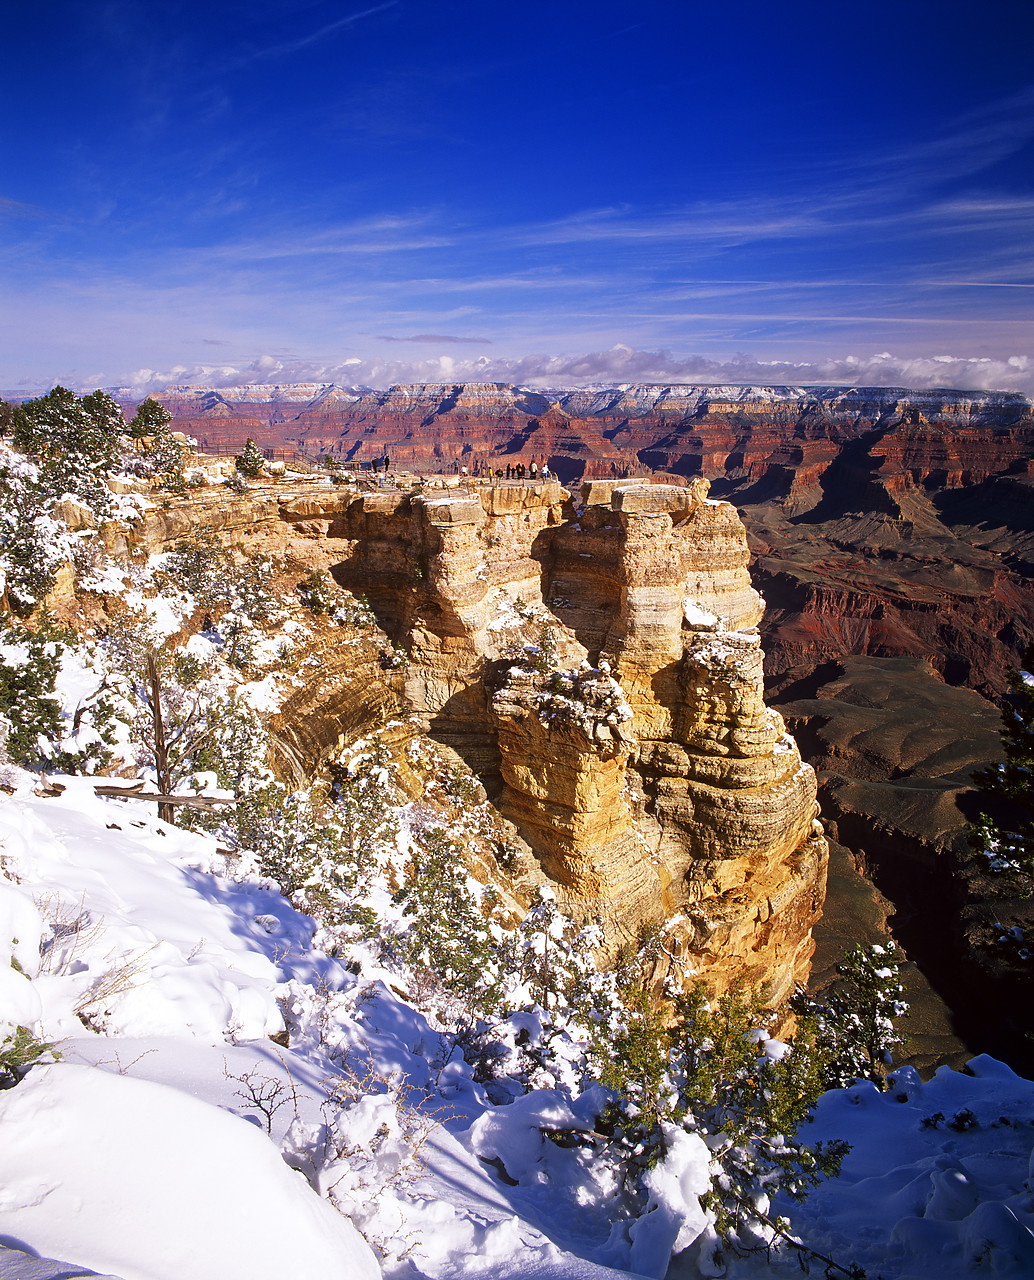 #980568-8 - Mather Point in Winter, Grand Canyon National Park, Arizona, USA